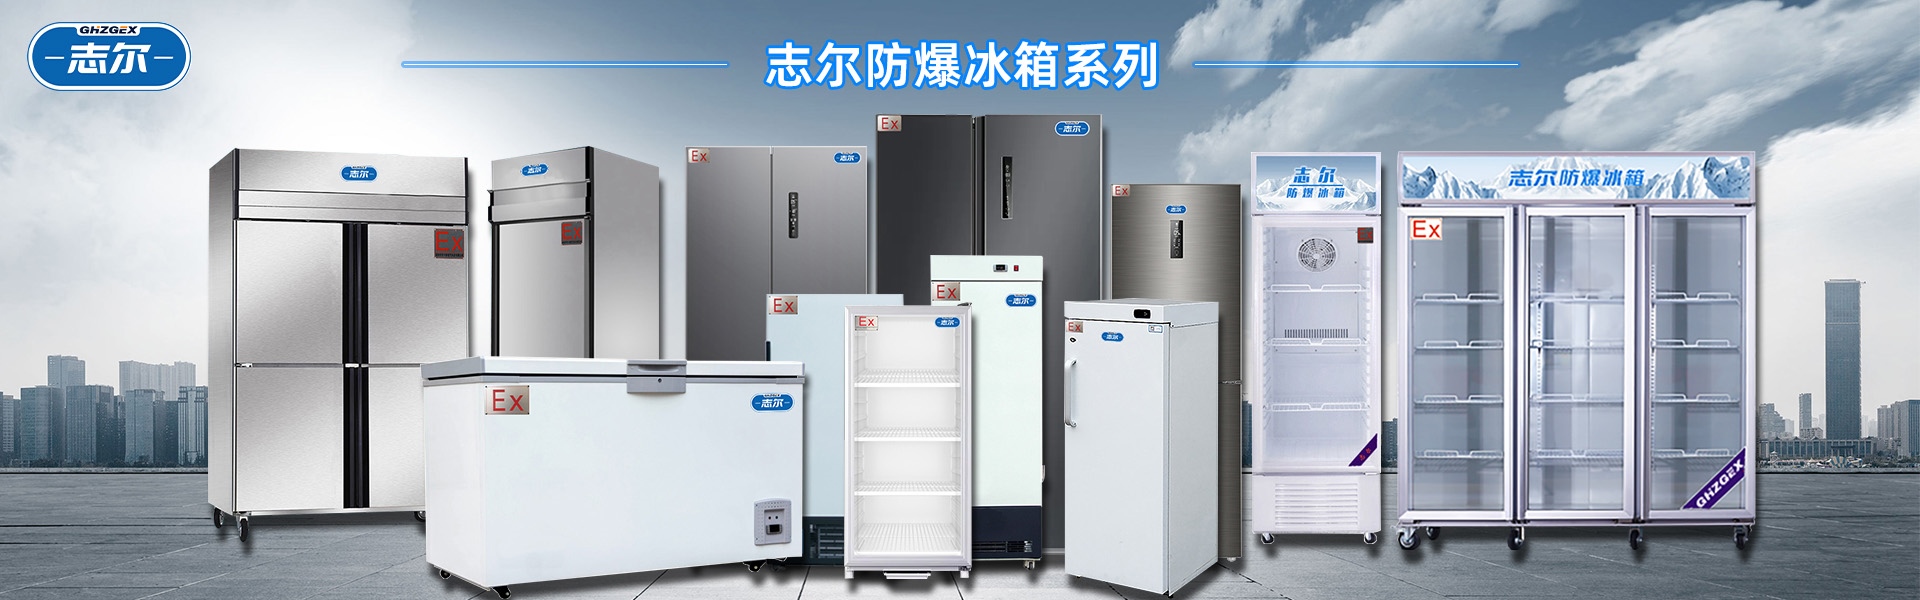  Production laboratory explosion-proof refrigerator - ultra-low temperature explosion-proof refrigerator - stainless steel explosion-proof refrigerator